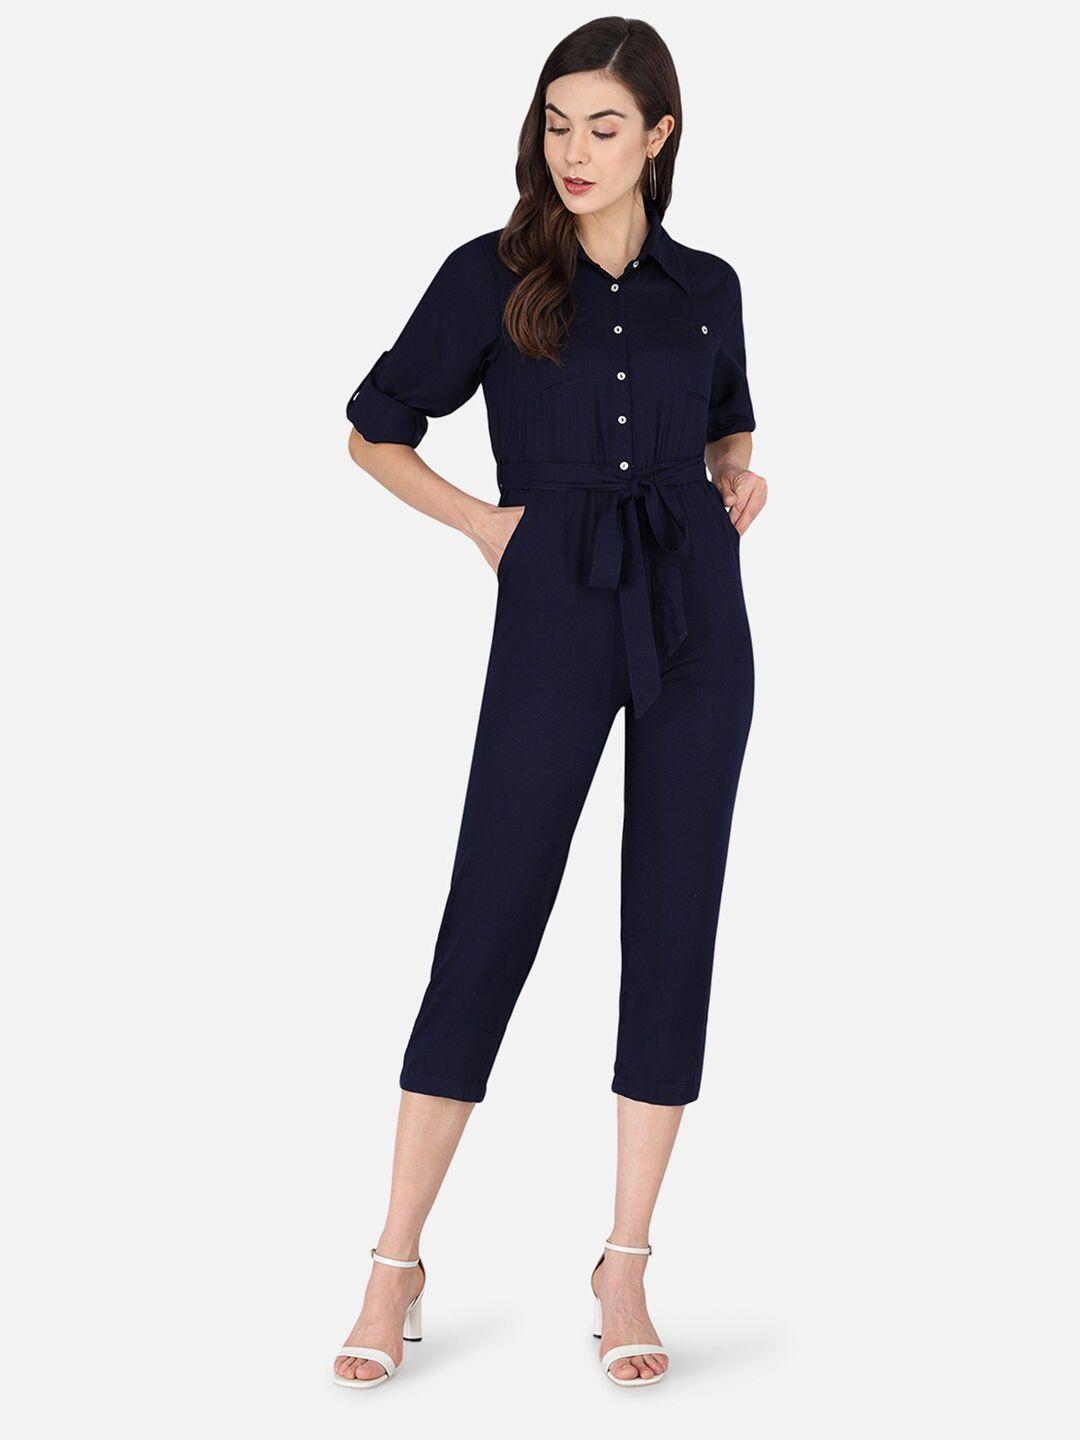 the dry state women navy blue solid capri jumpsuit